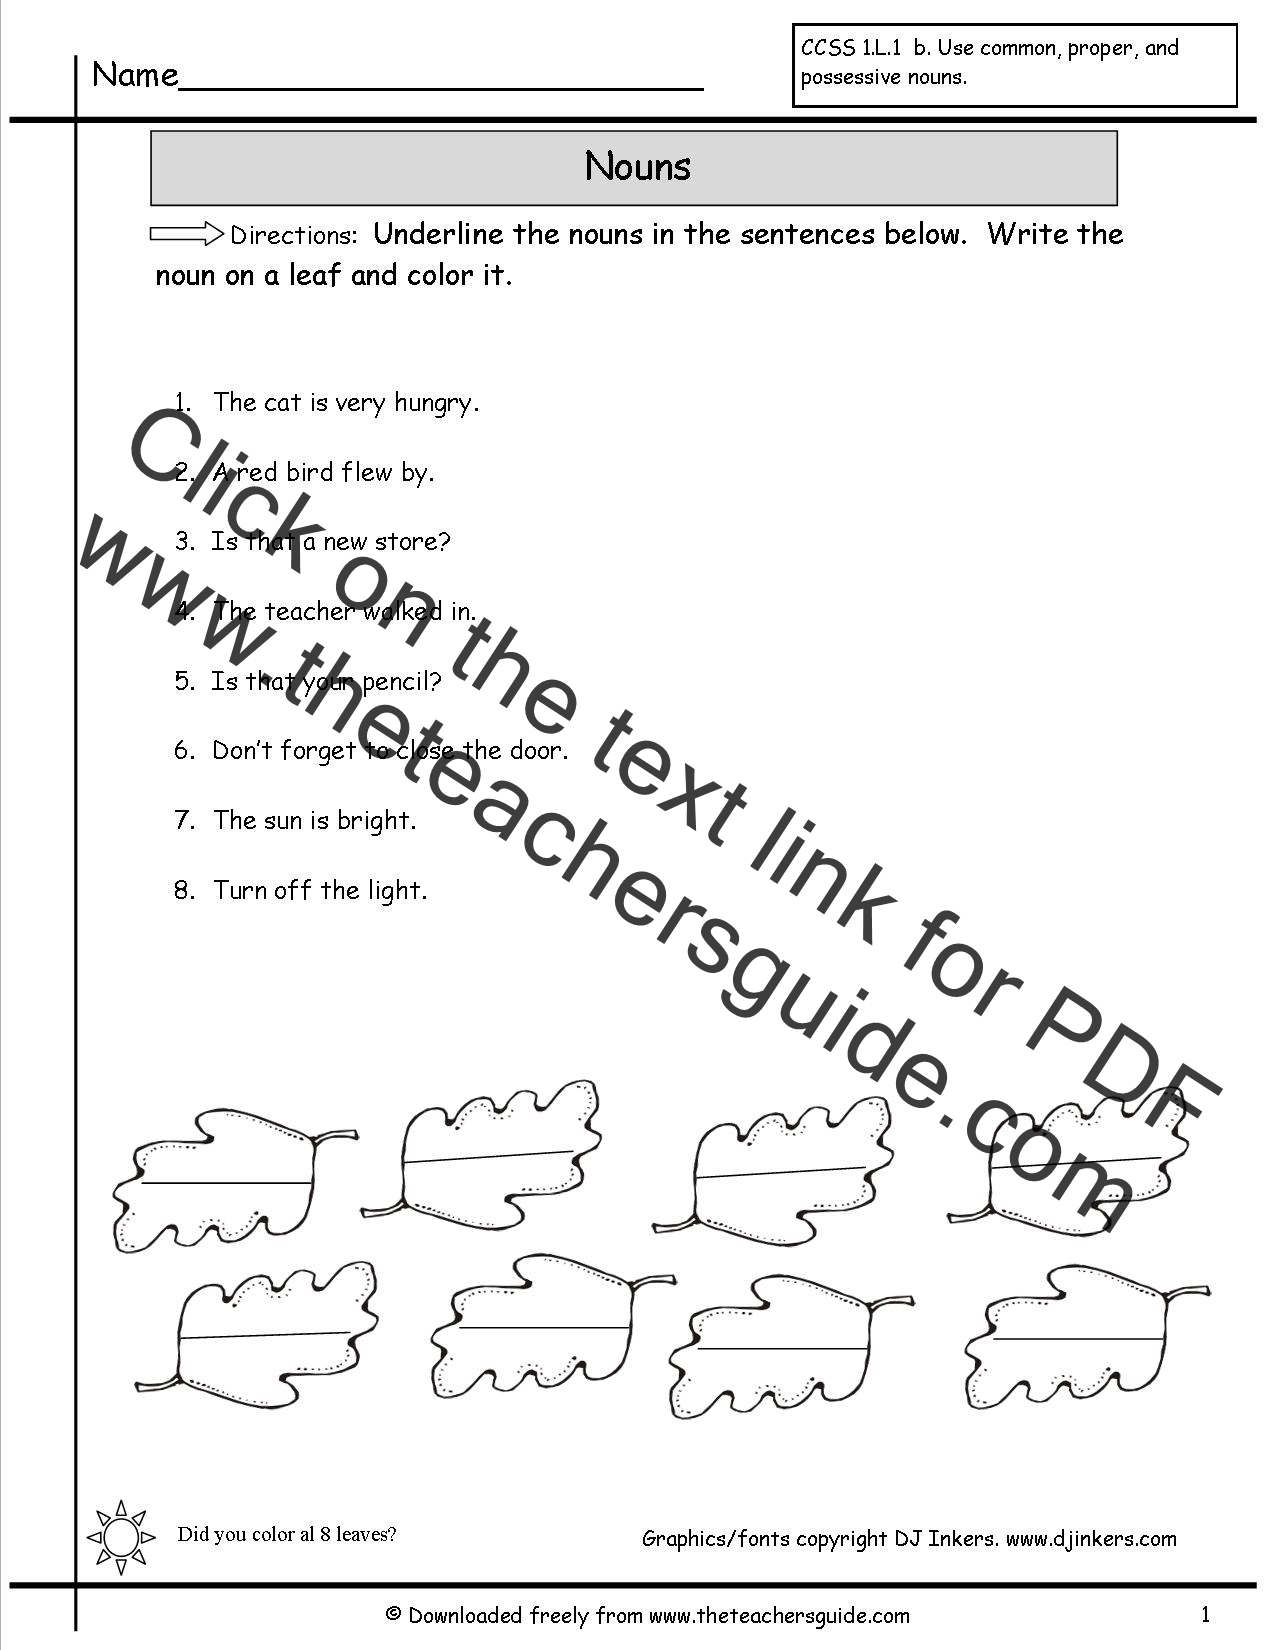 Nouns Worksheets From The Teacher s Guide